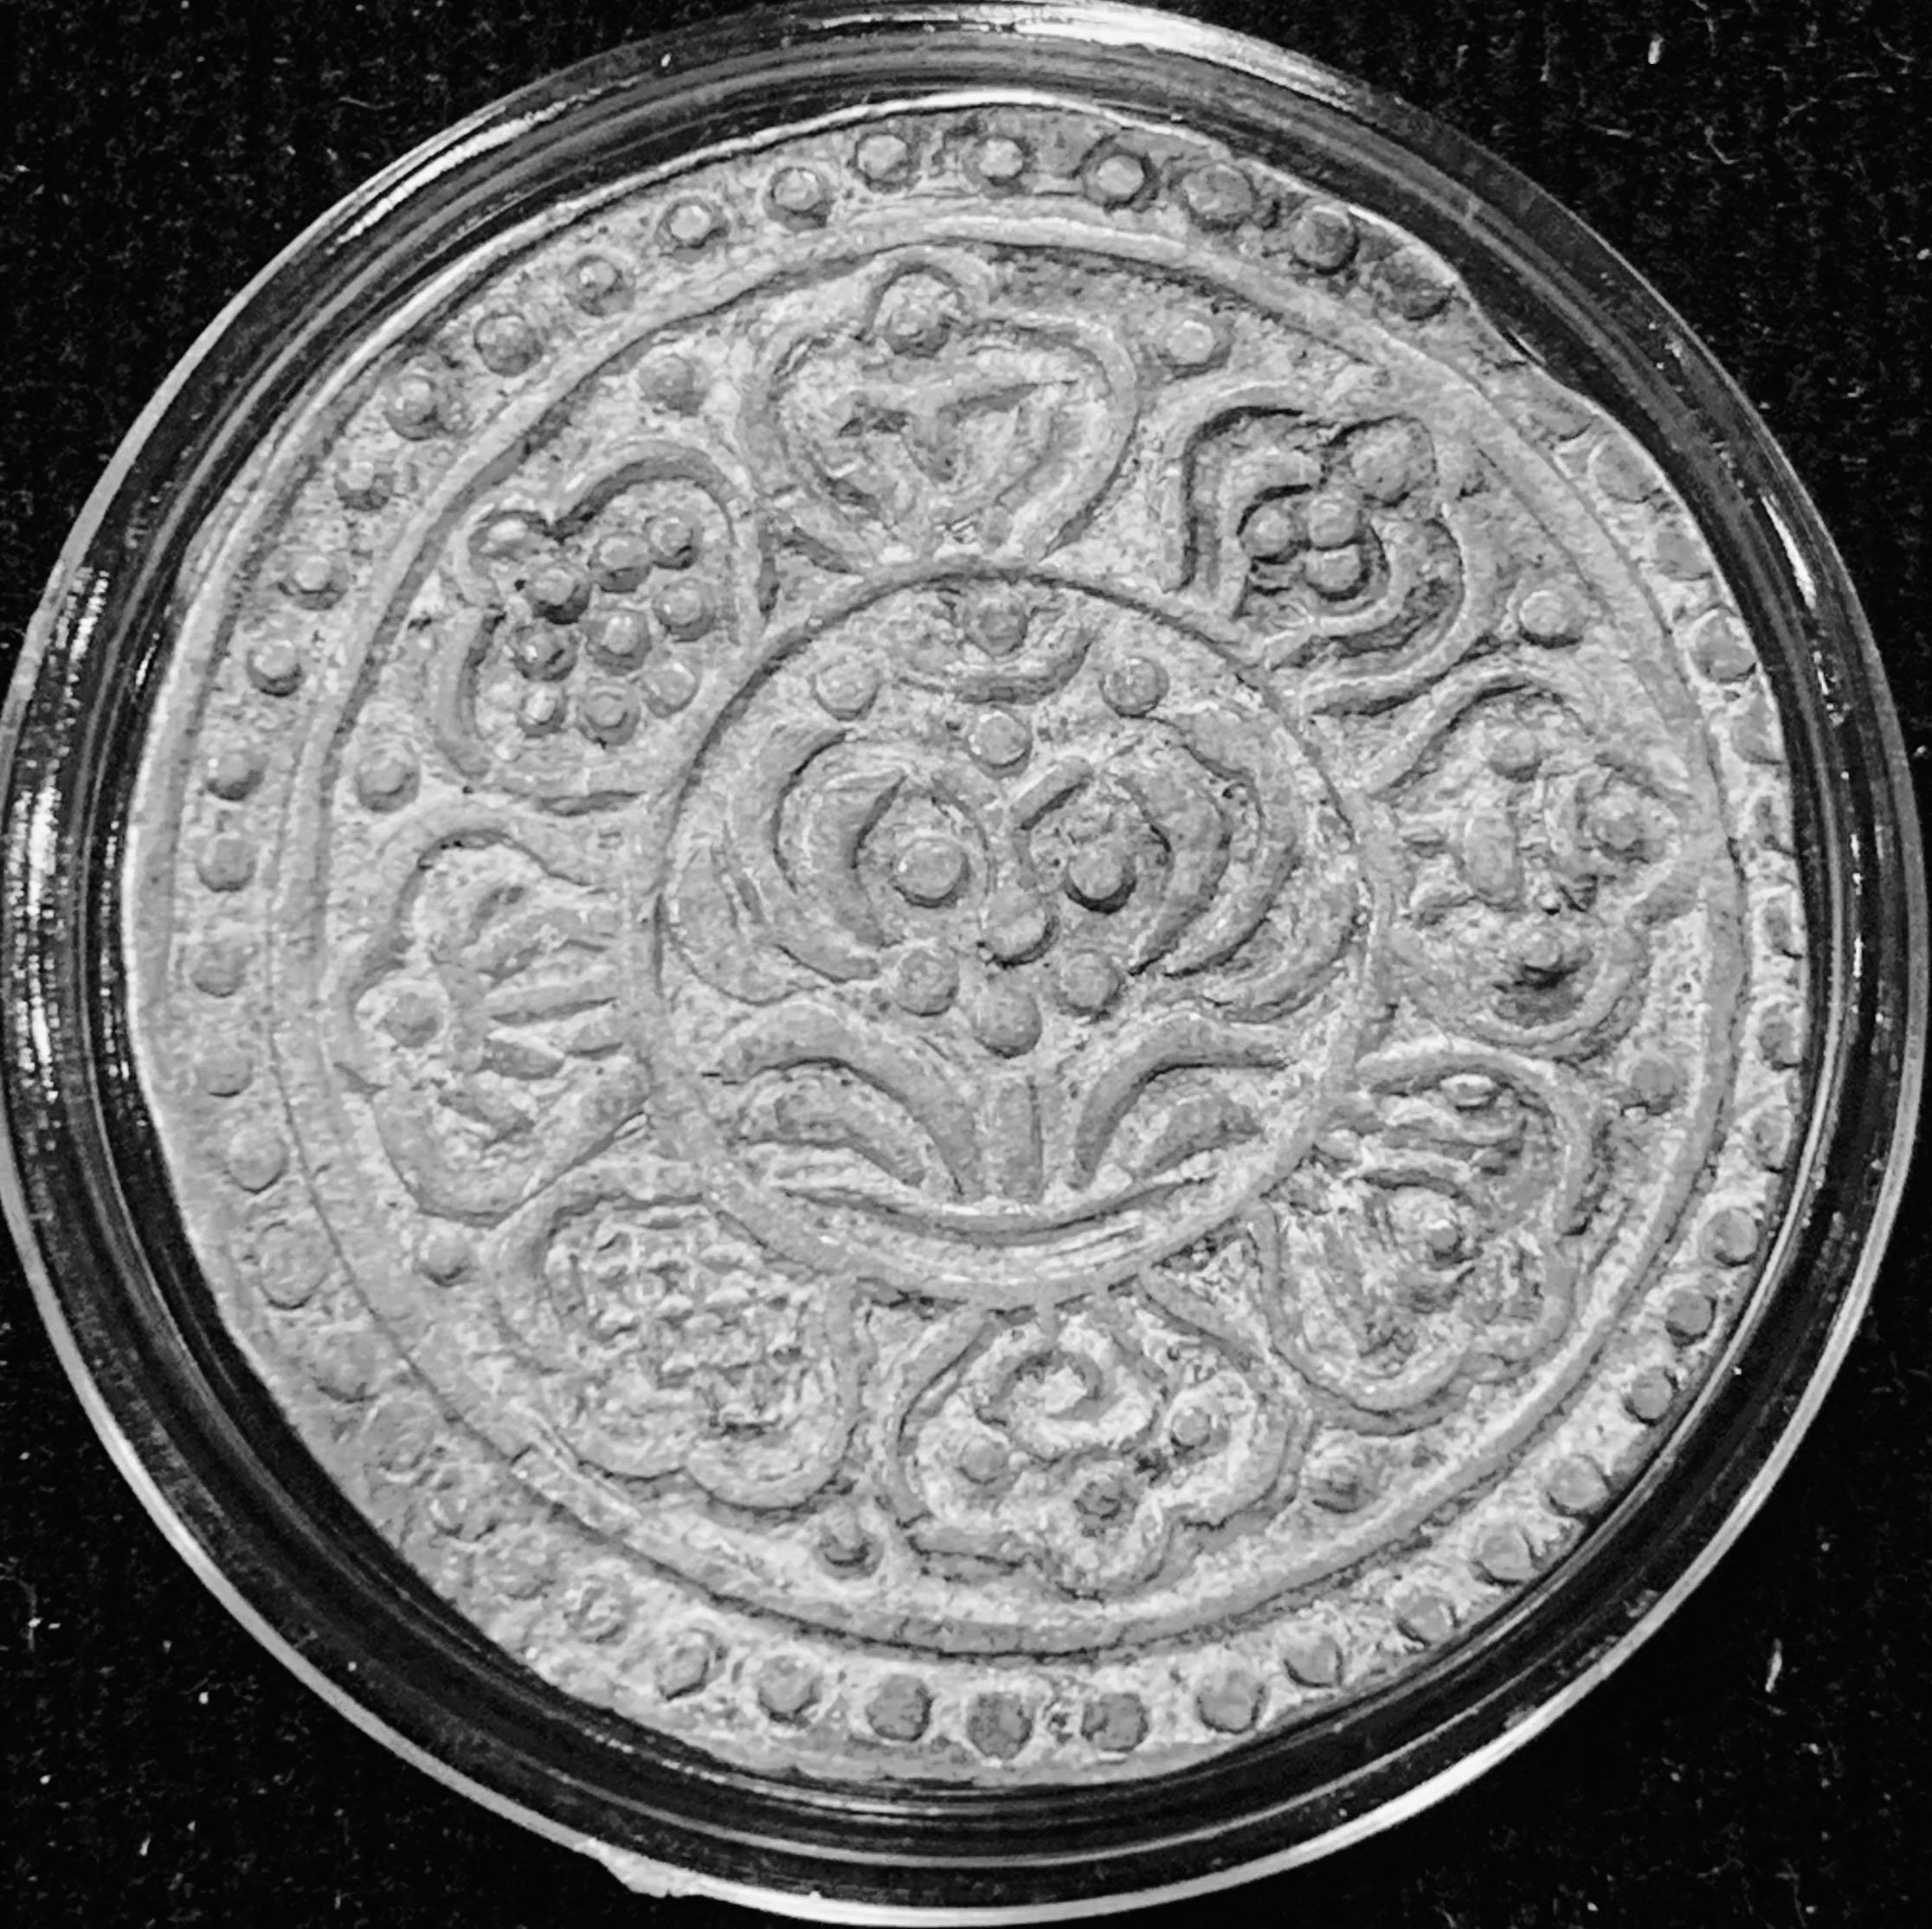 TIBET "Ga-Den" TANGKA SACRED SILVER Coin FROM THE ROOF OF WORLD Buddhist 1 